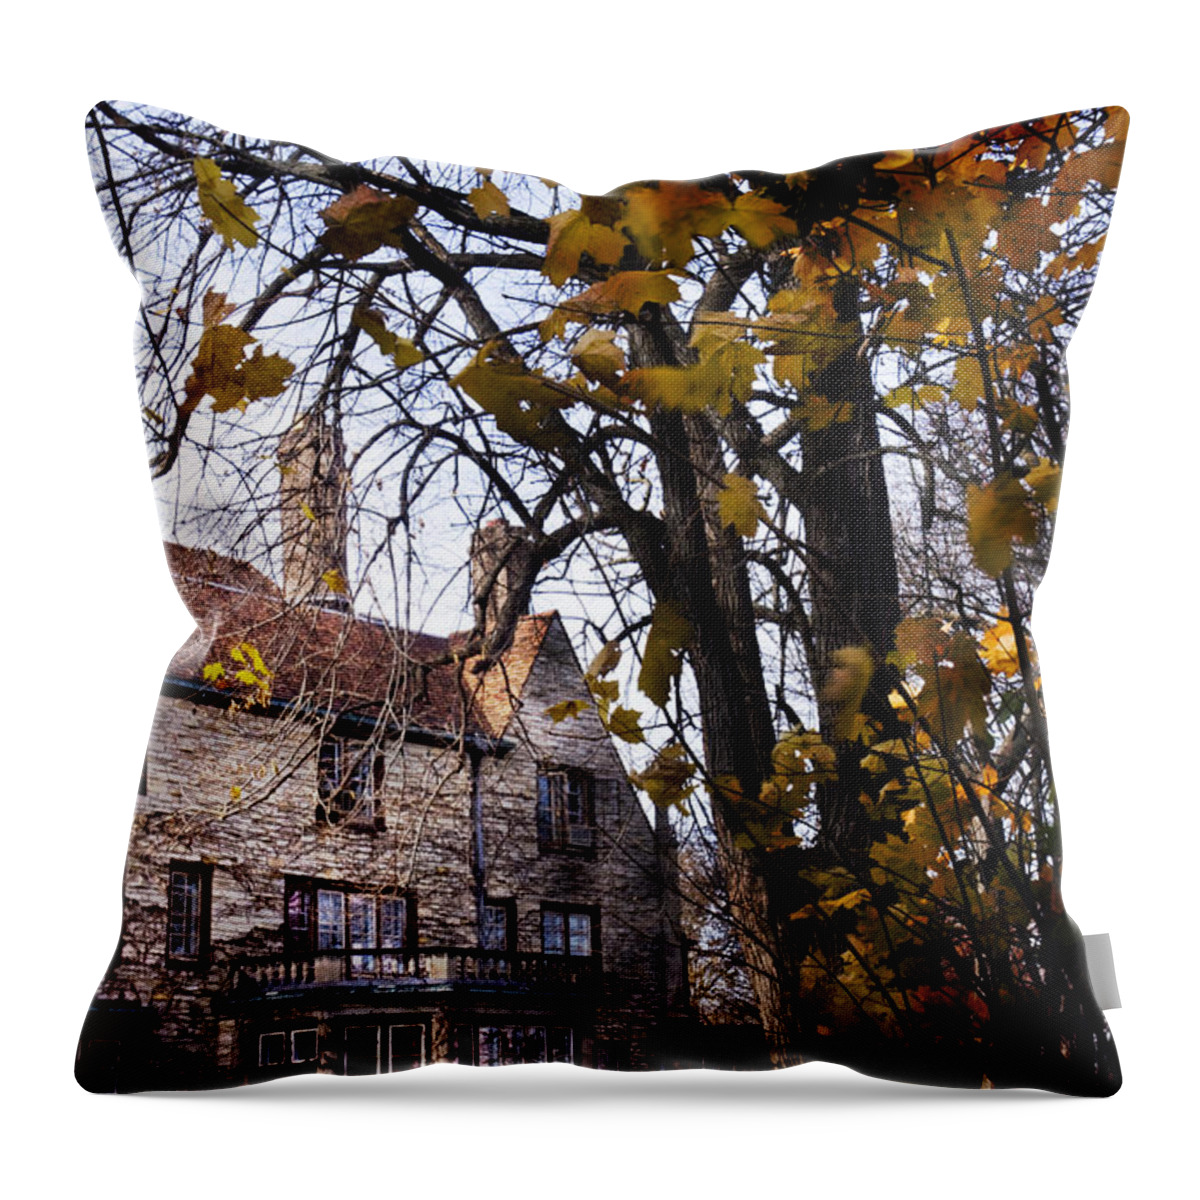 Mansion; Home; House; Outside; Fall; Autumn; Leaves; Dead; Trees; English Tudor; Outside; Outdoors; Large; Stone; Yard; Back; Stately Throw Pillow featuring the photograph Manor by Margie Hurwich